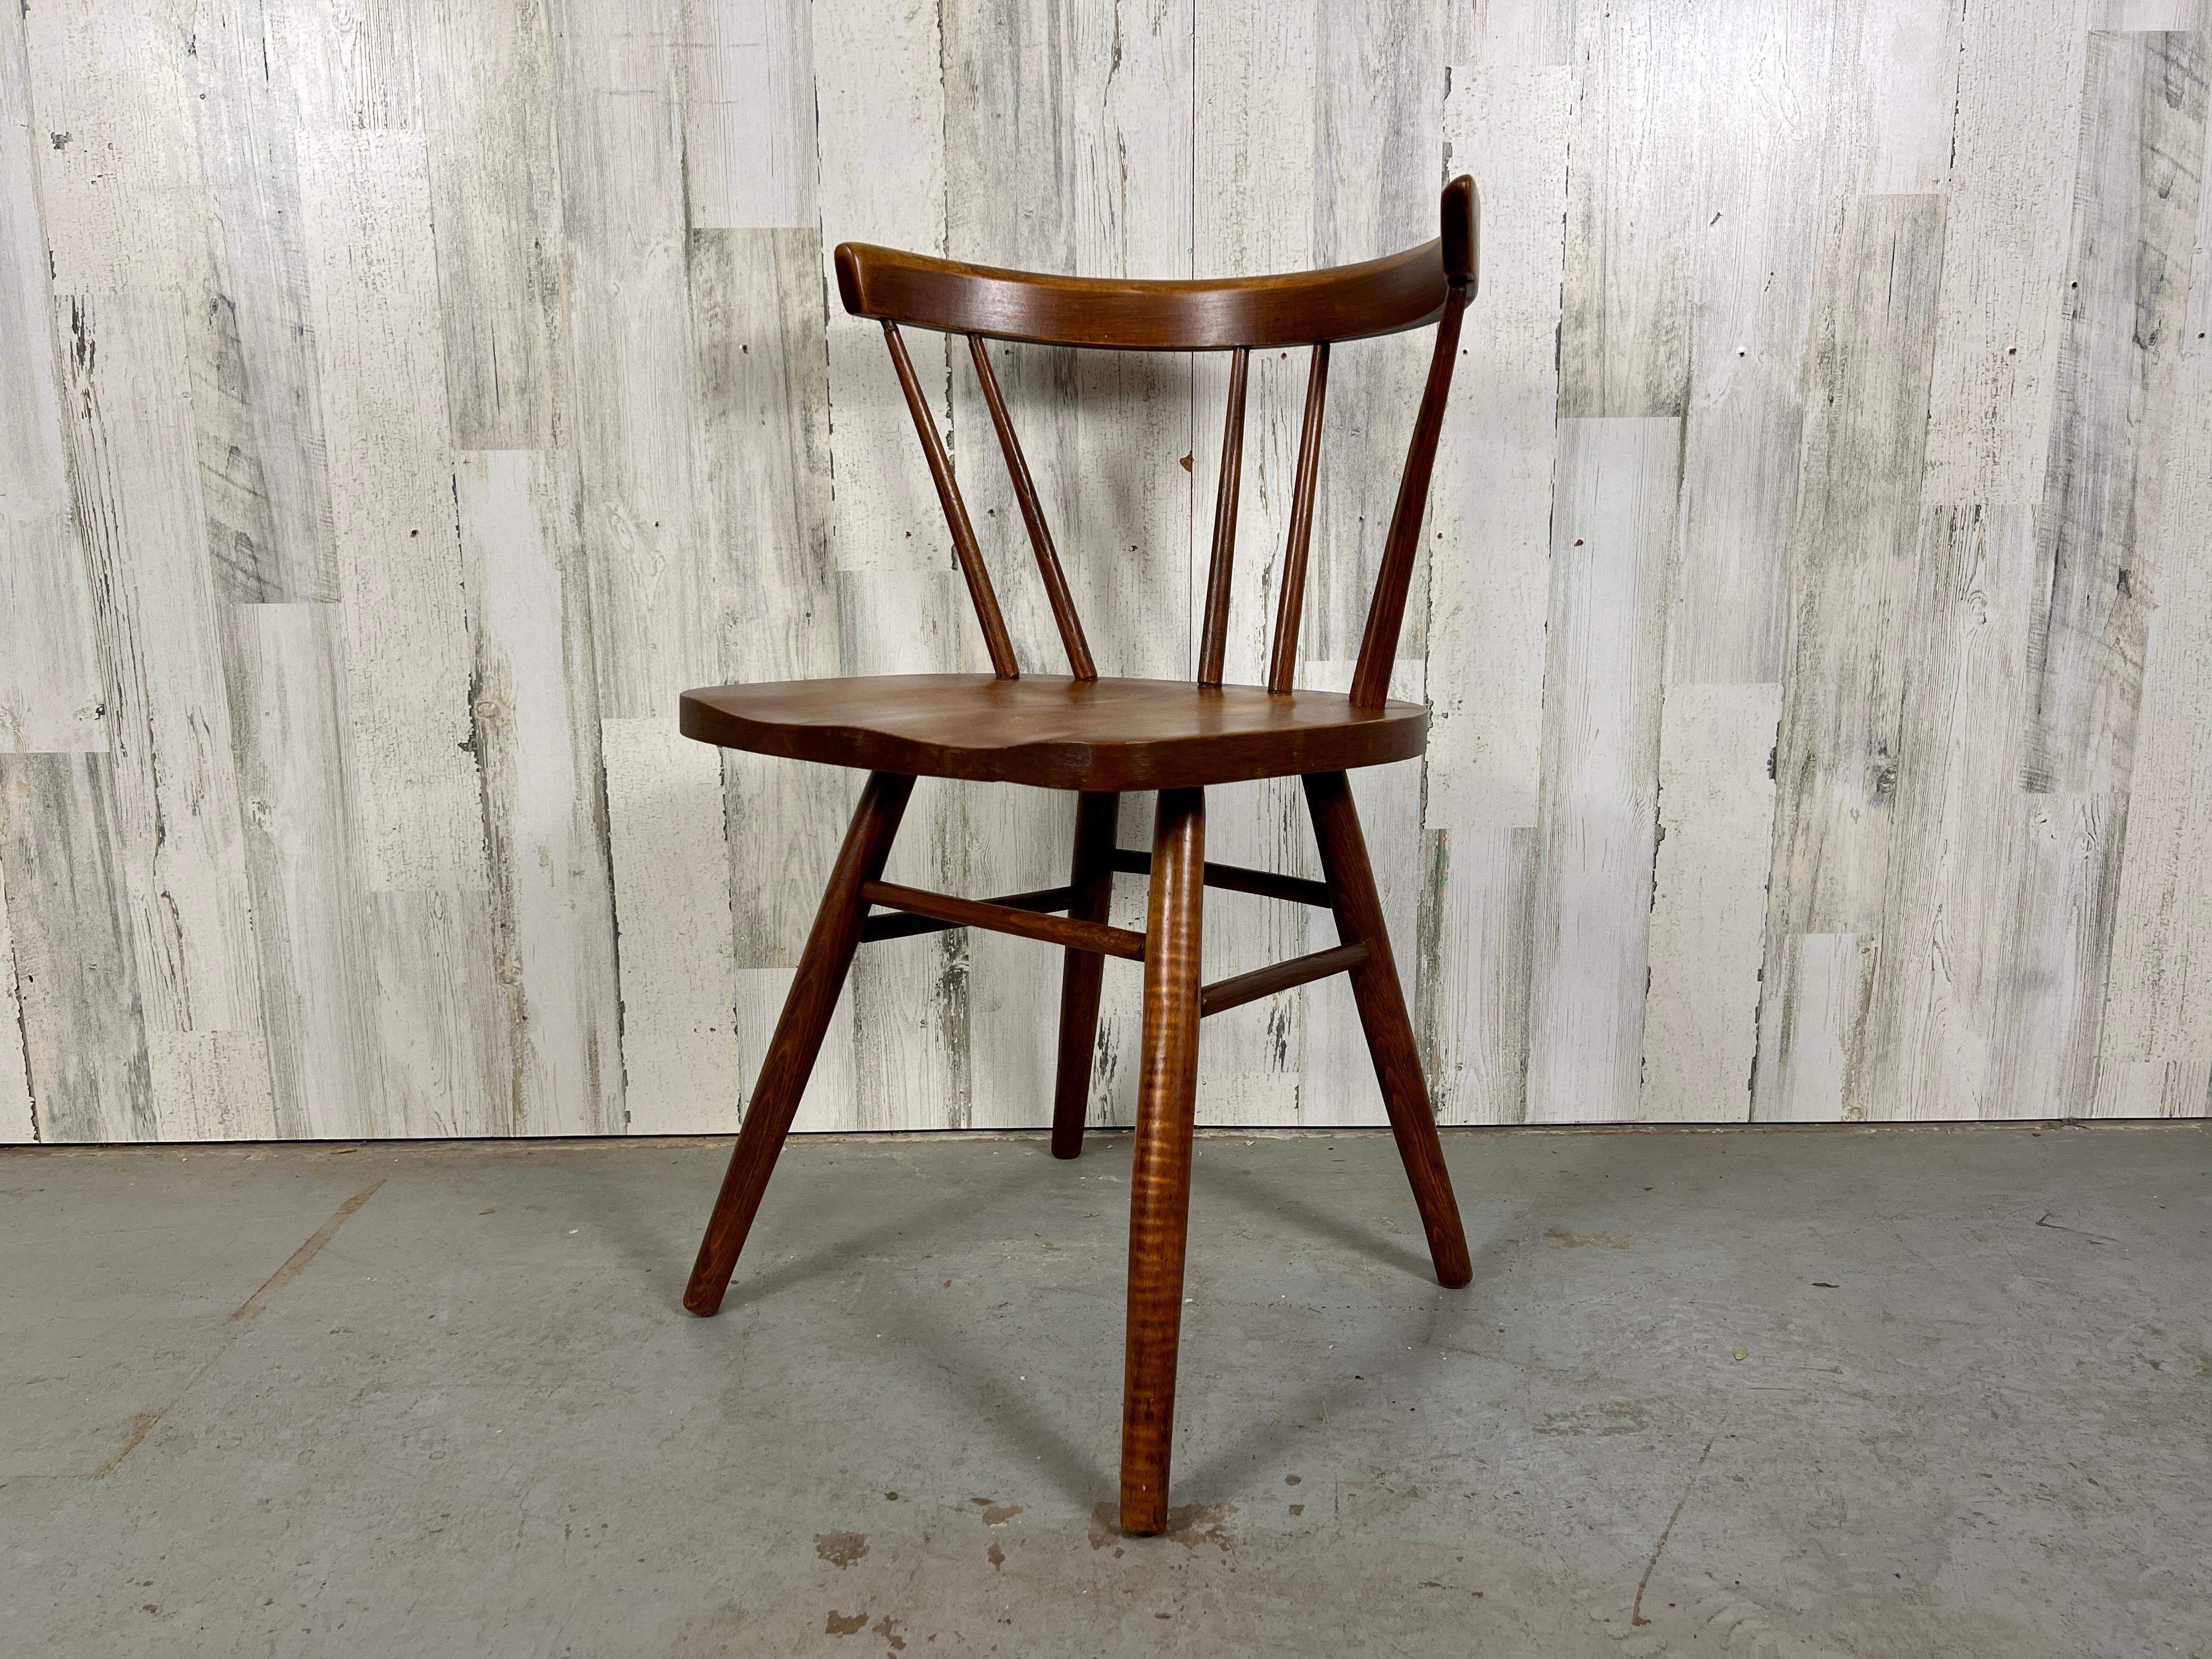 Mid Century Chair by Spainhour, in the style of the 